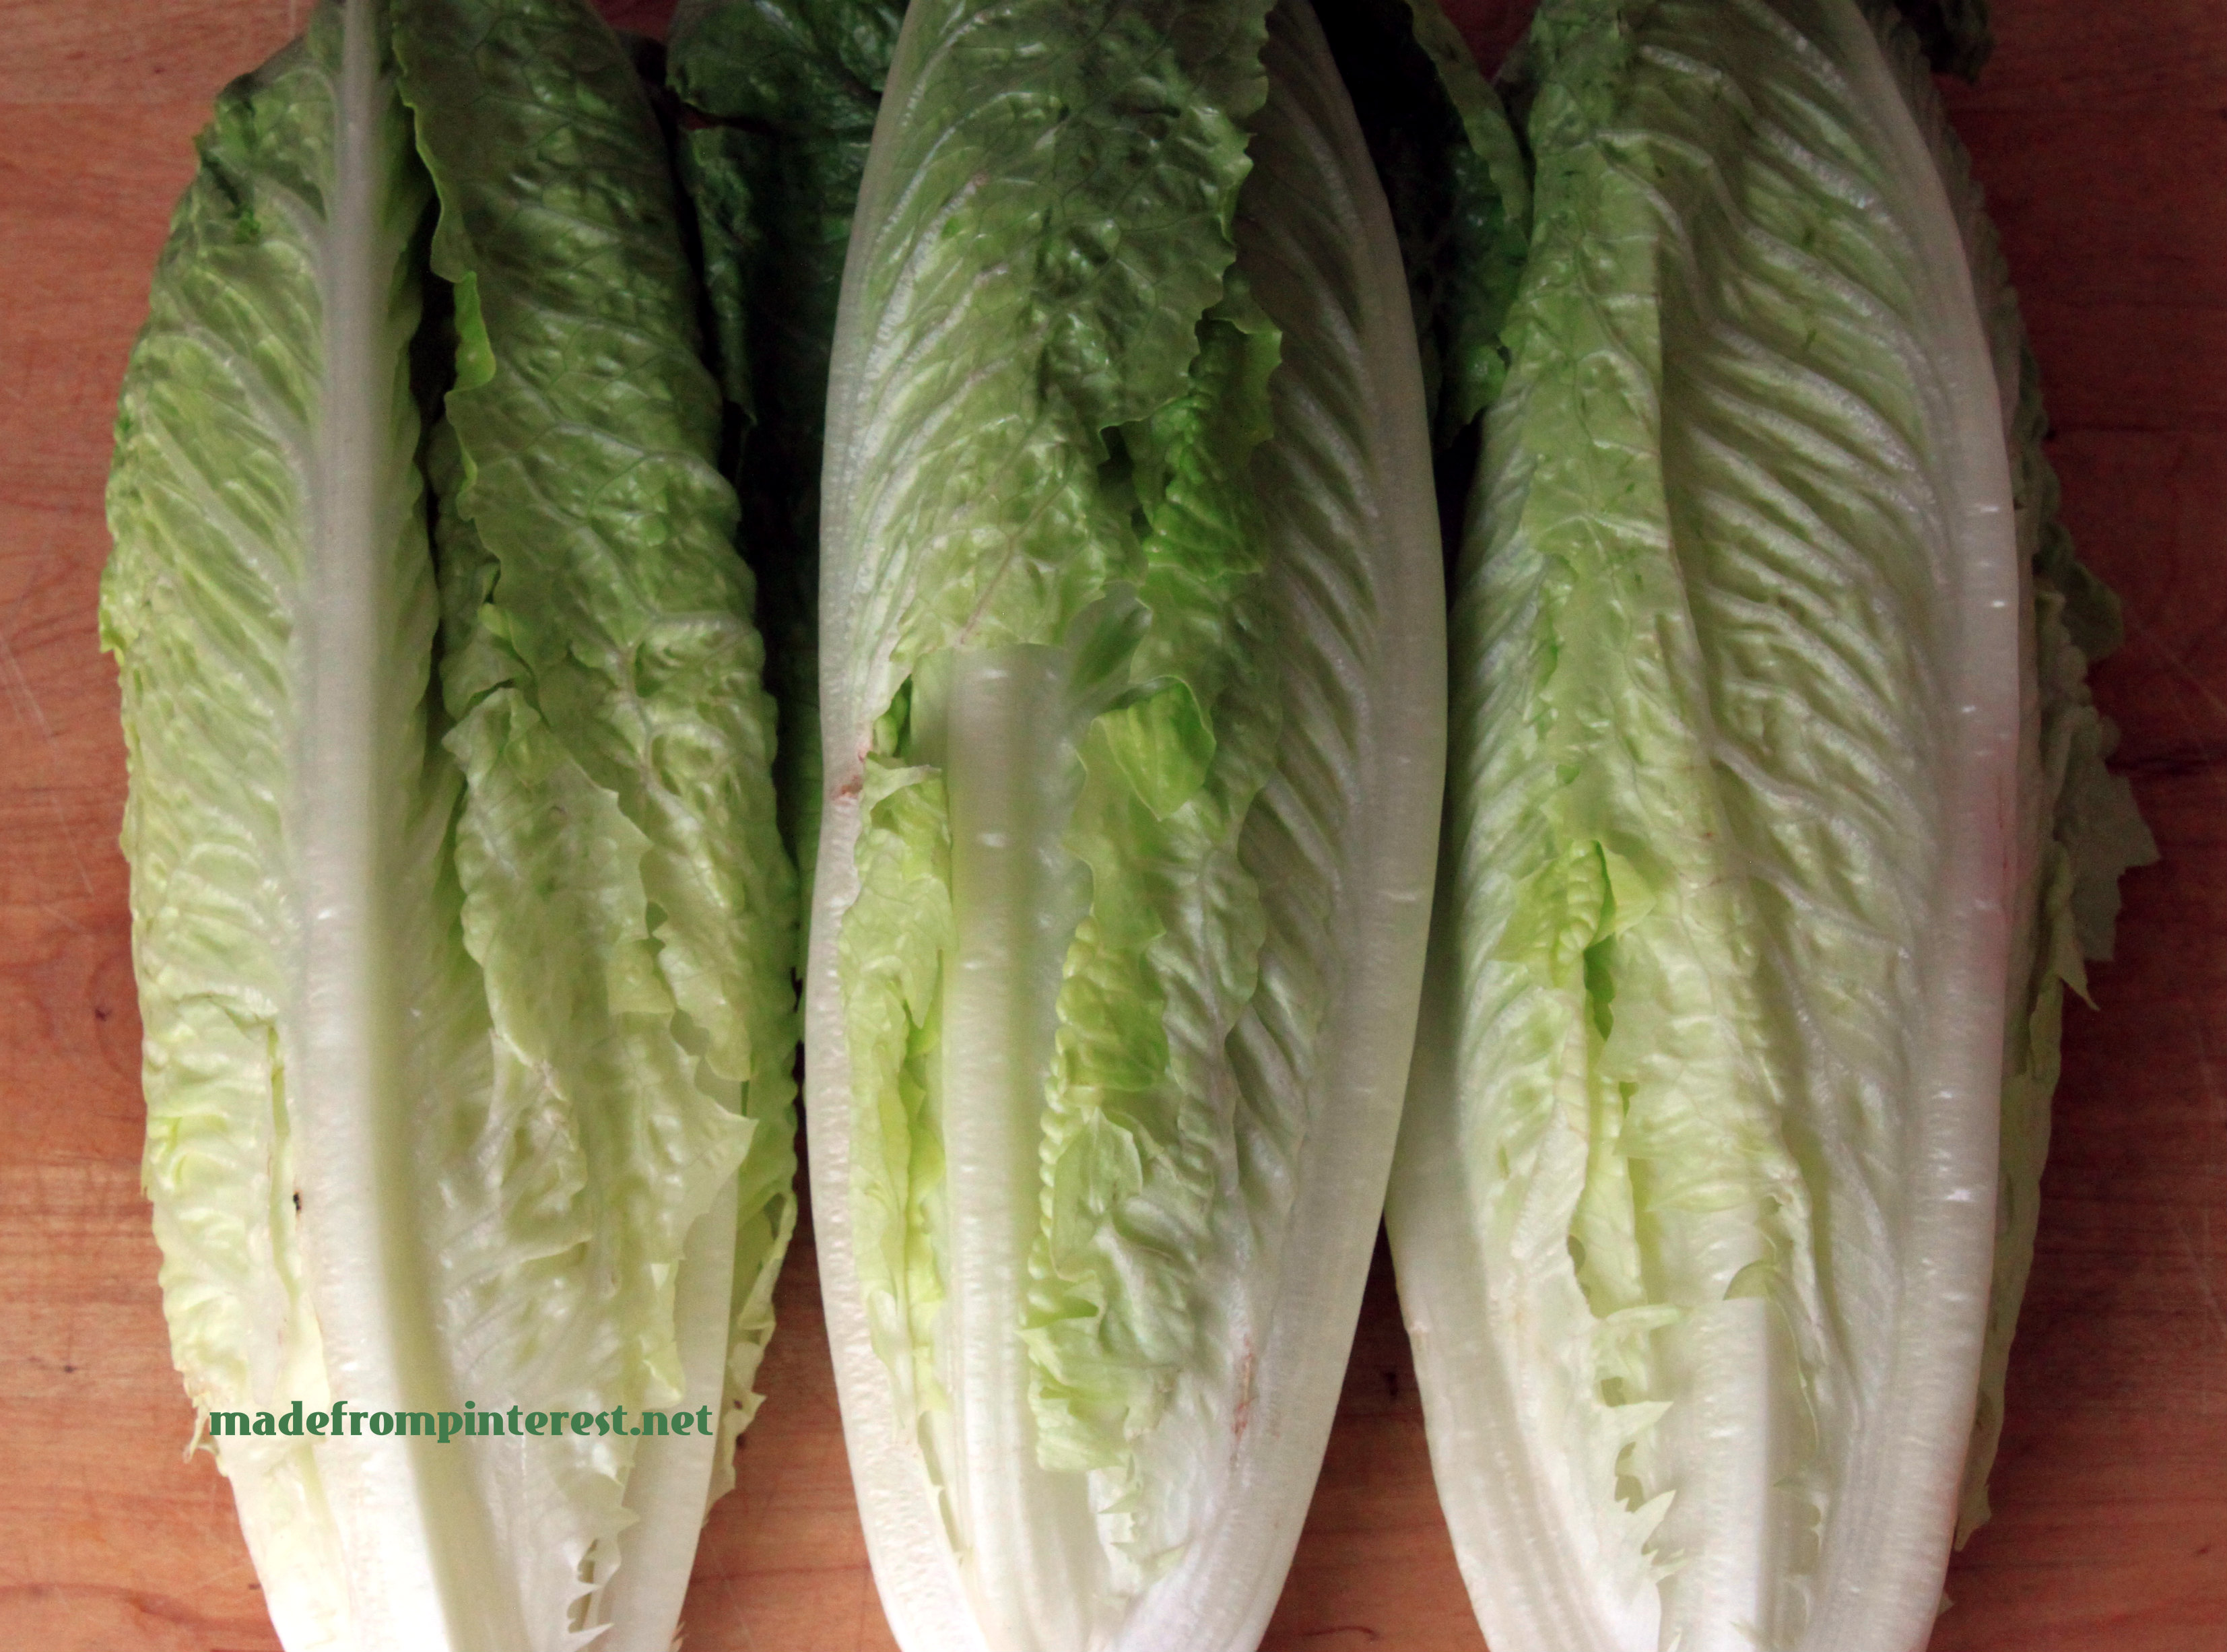 Three heads of lettuce stored four ways to find best method of storage by madefrompinterest.net